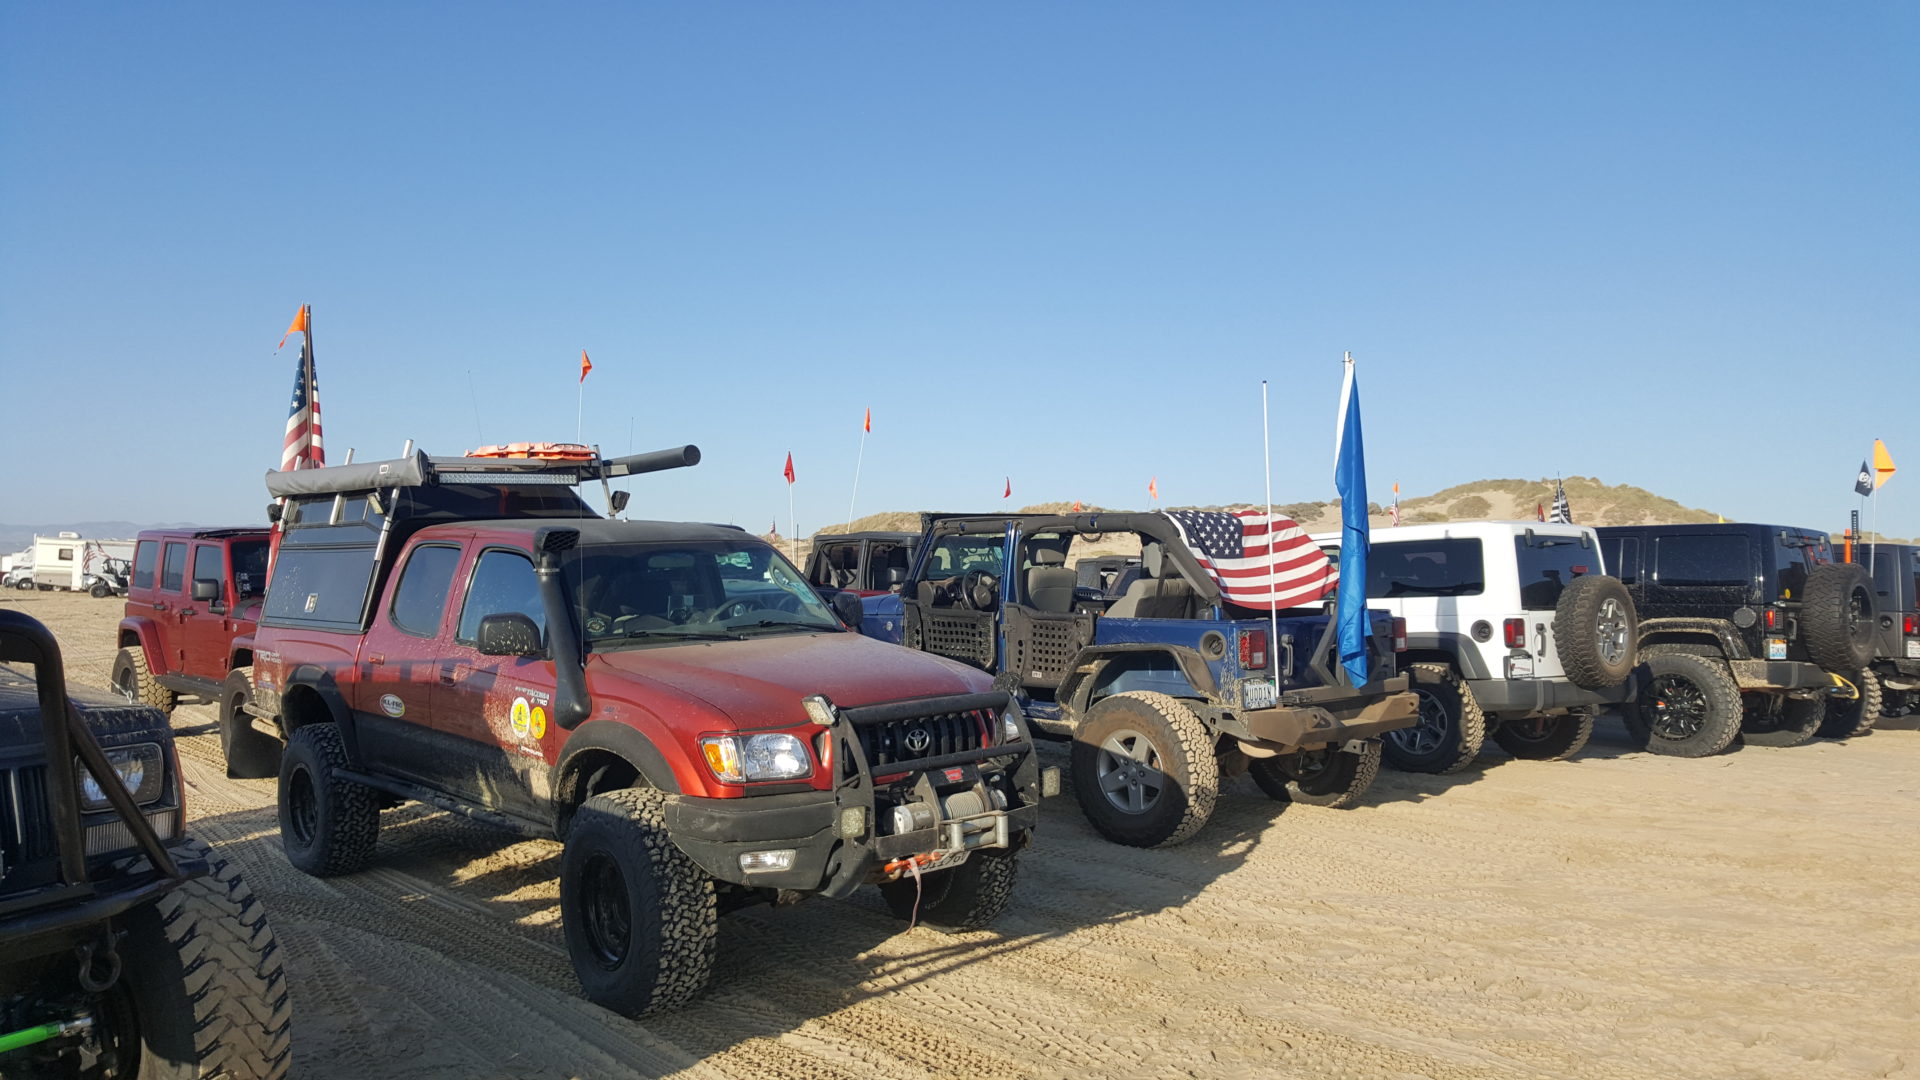 Mike at Jeep Beach West 2017